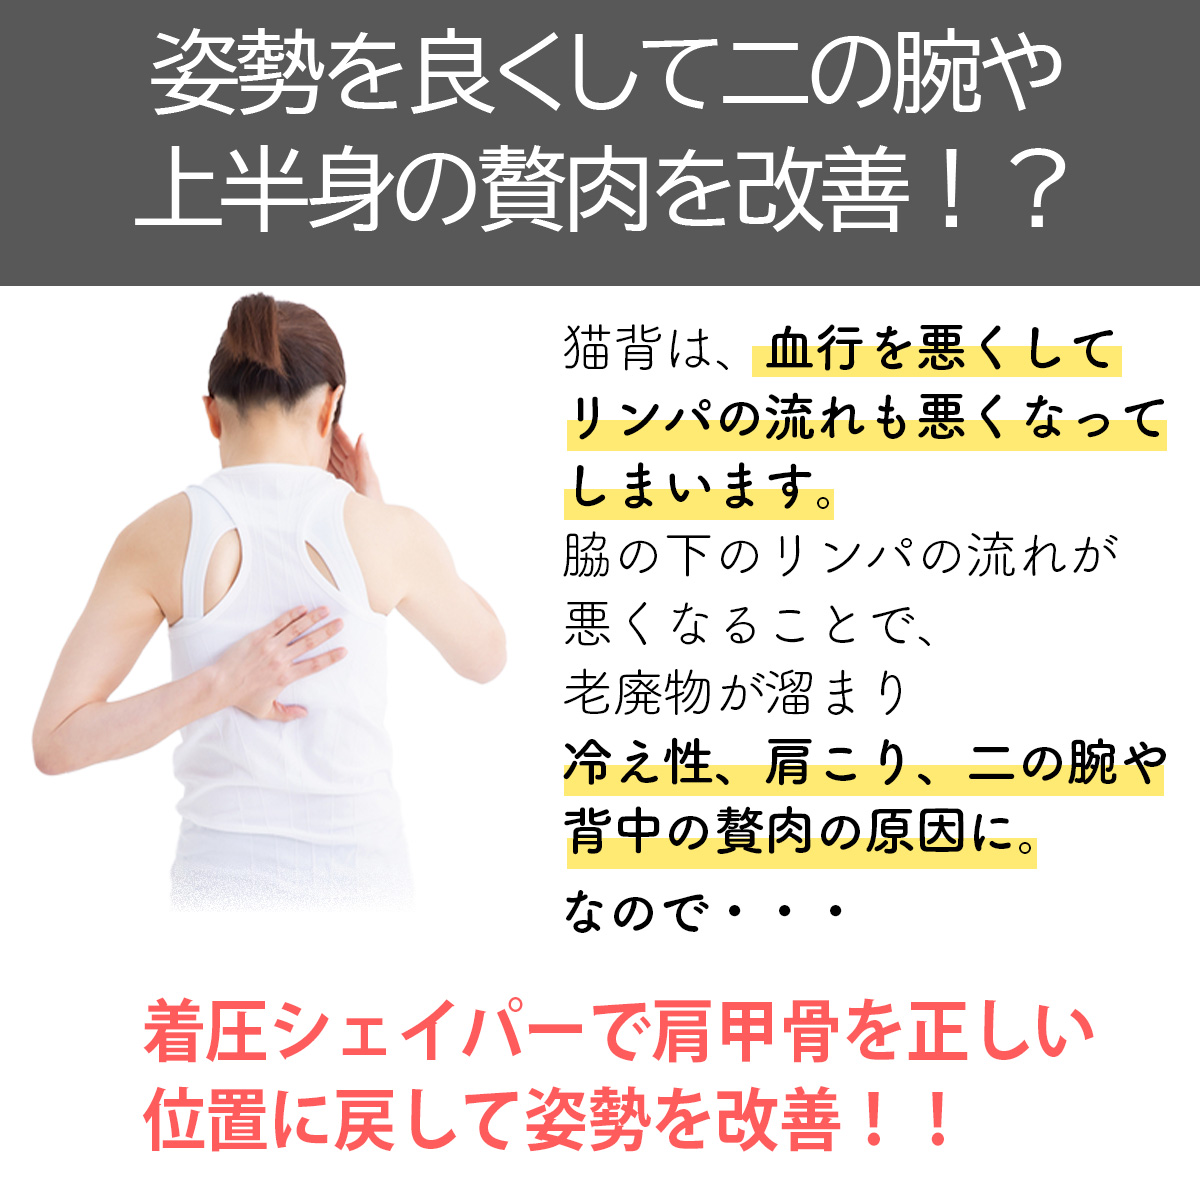  two. arm sheipa- supporter two. arm put on pressure summer discount tighten two. arm .. diet goods two. arm cover cat . to coil shoulder effect posture correction chilling inner 